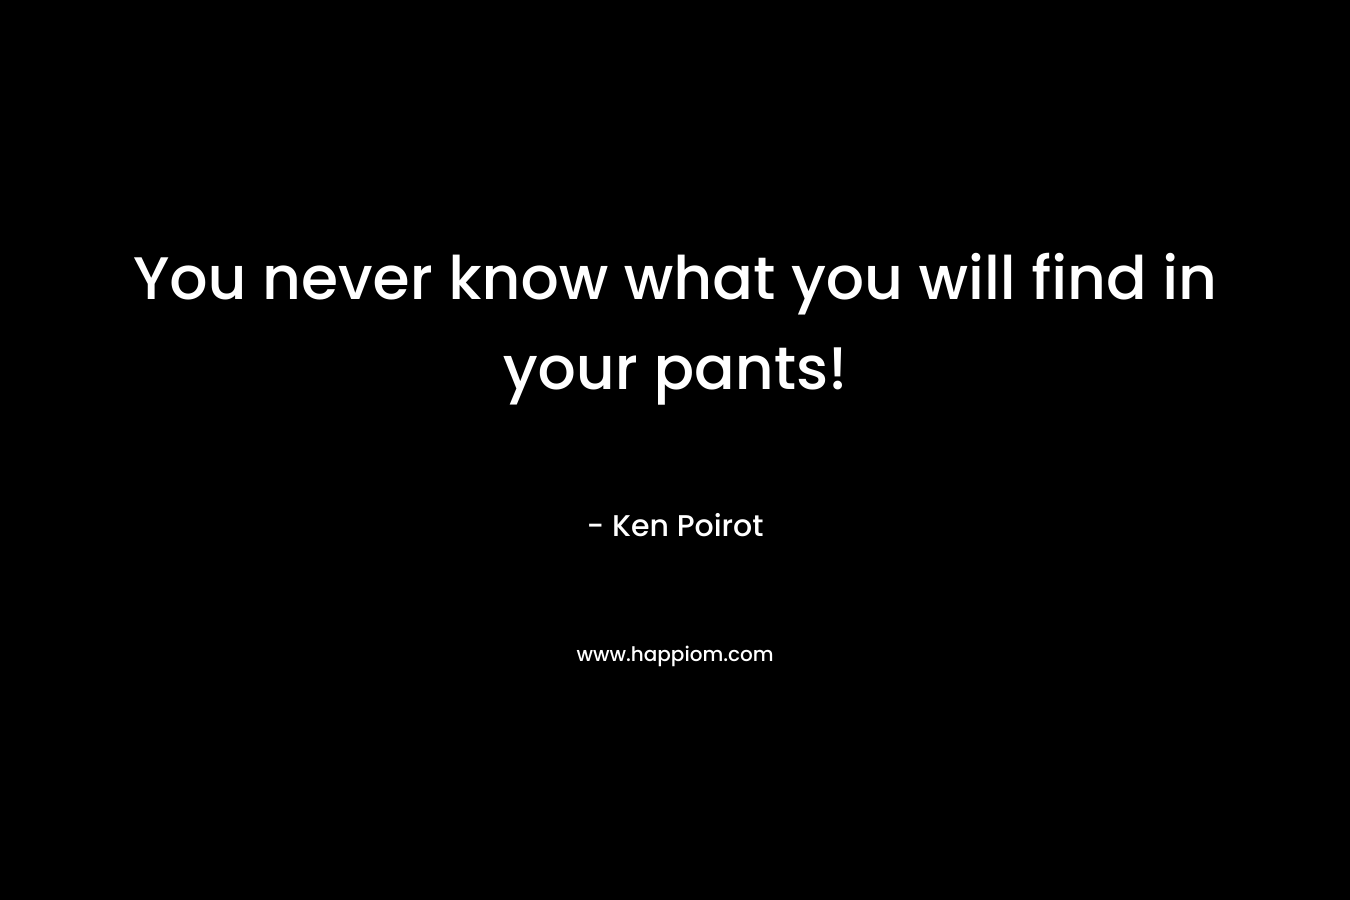 You never know what you will find in your pants!